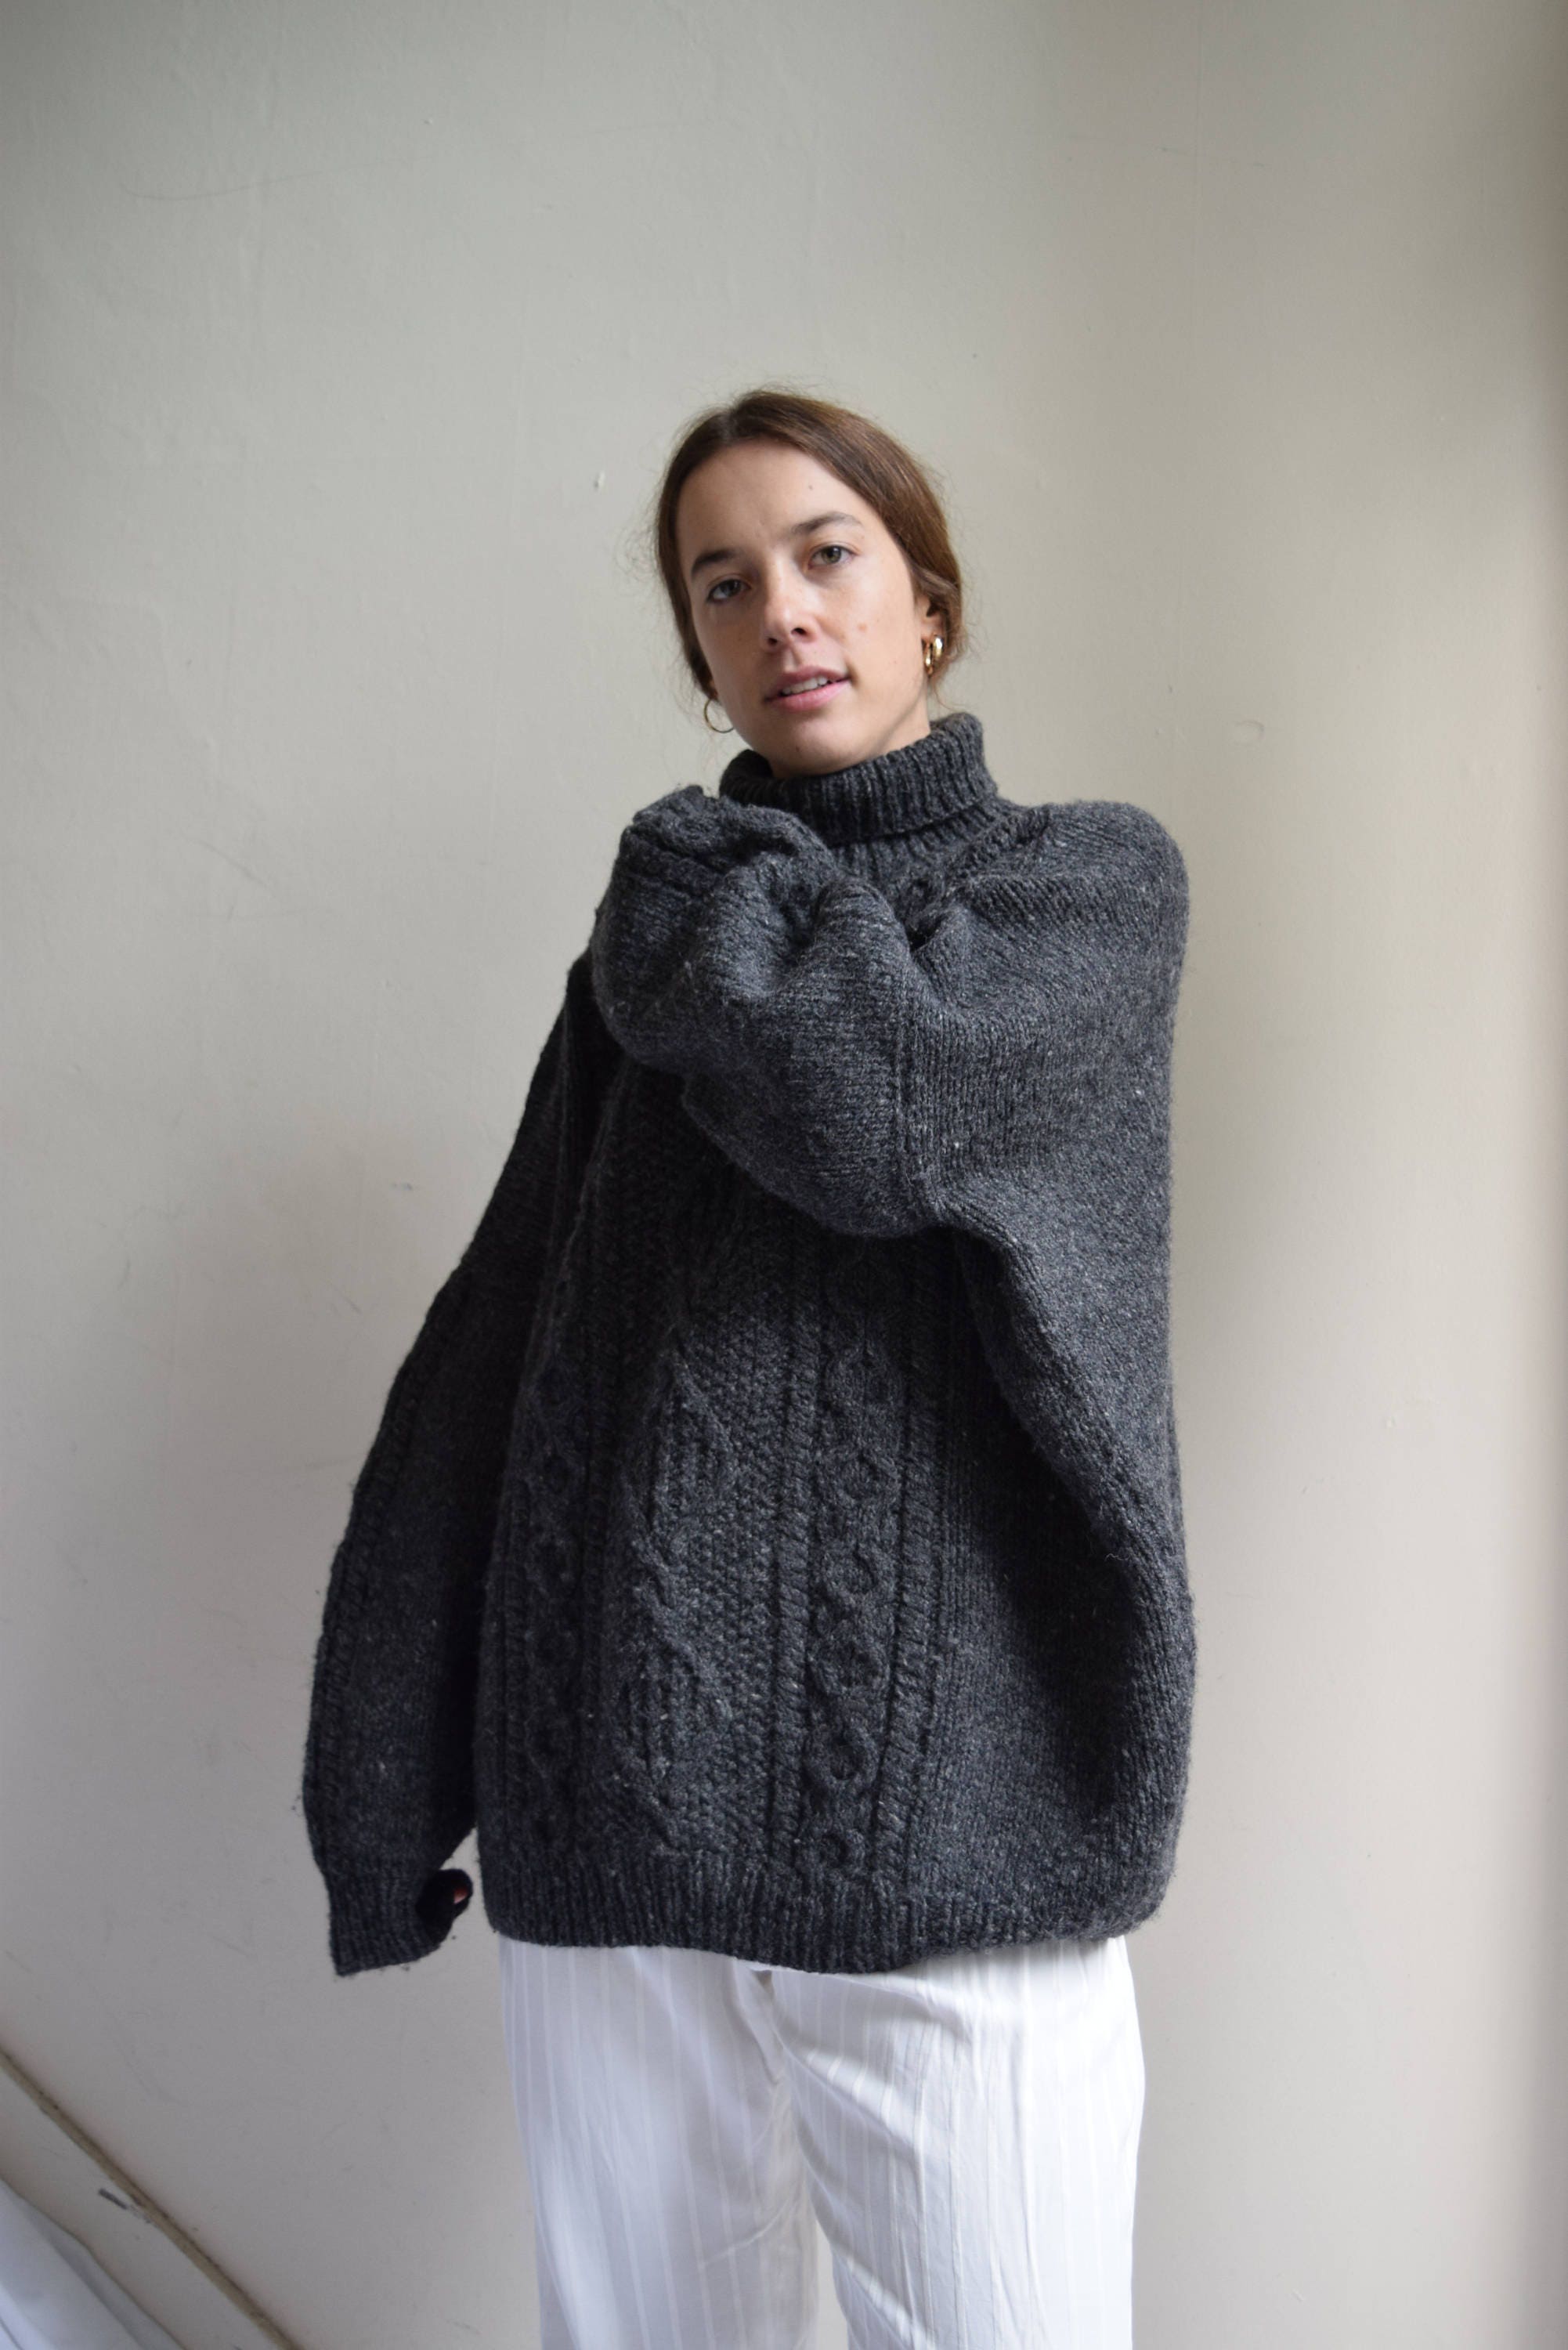 Charcoal Grey, Chunky Wool Cable Knit Turleneck Sweater.